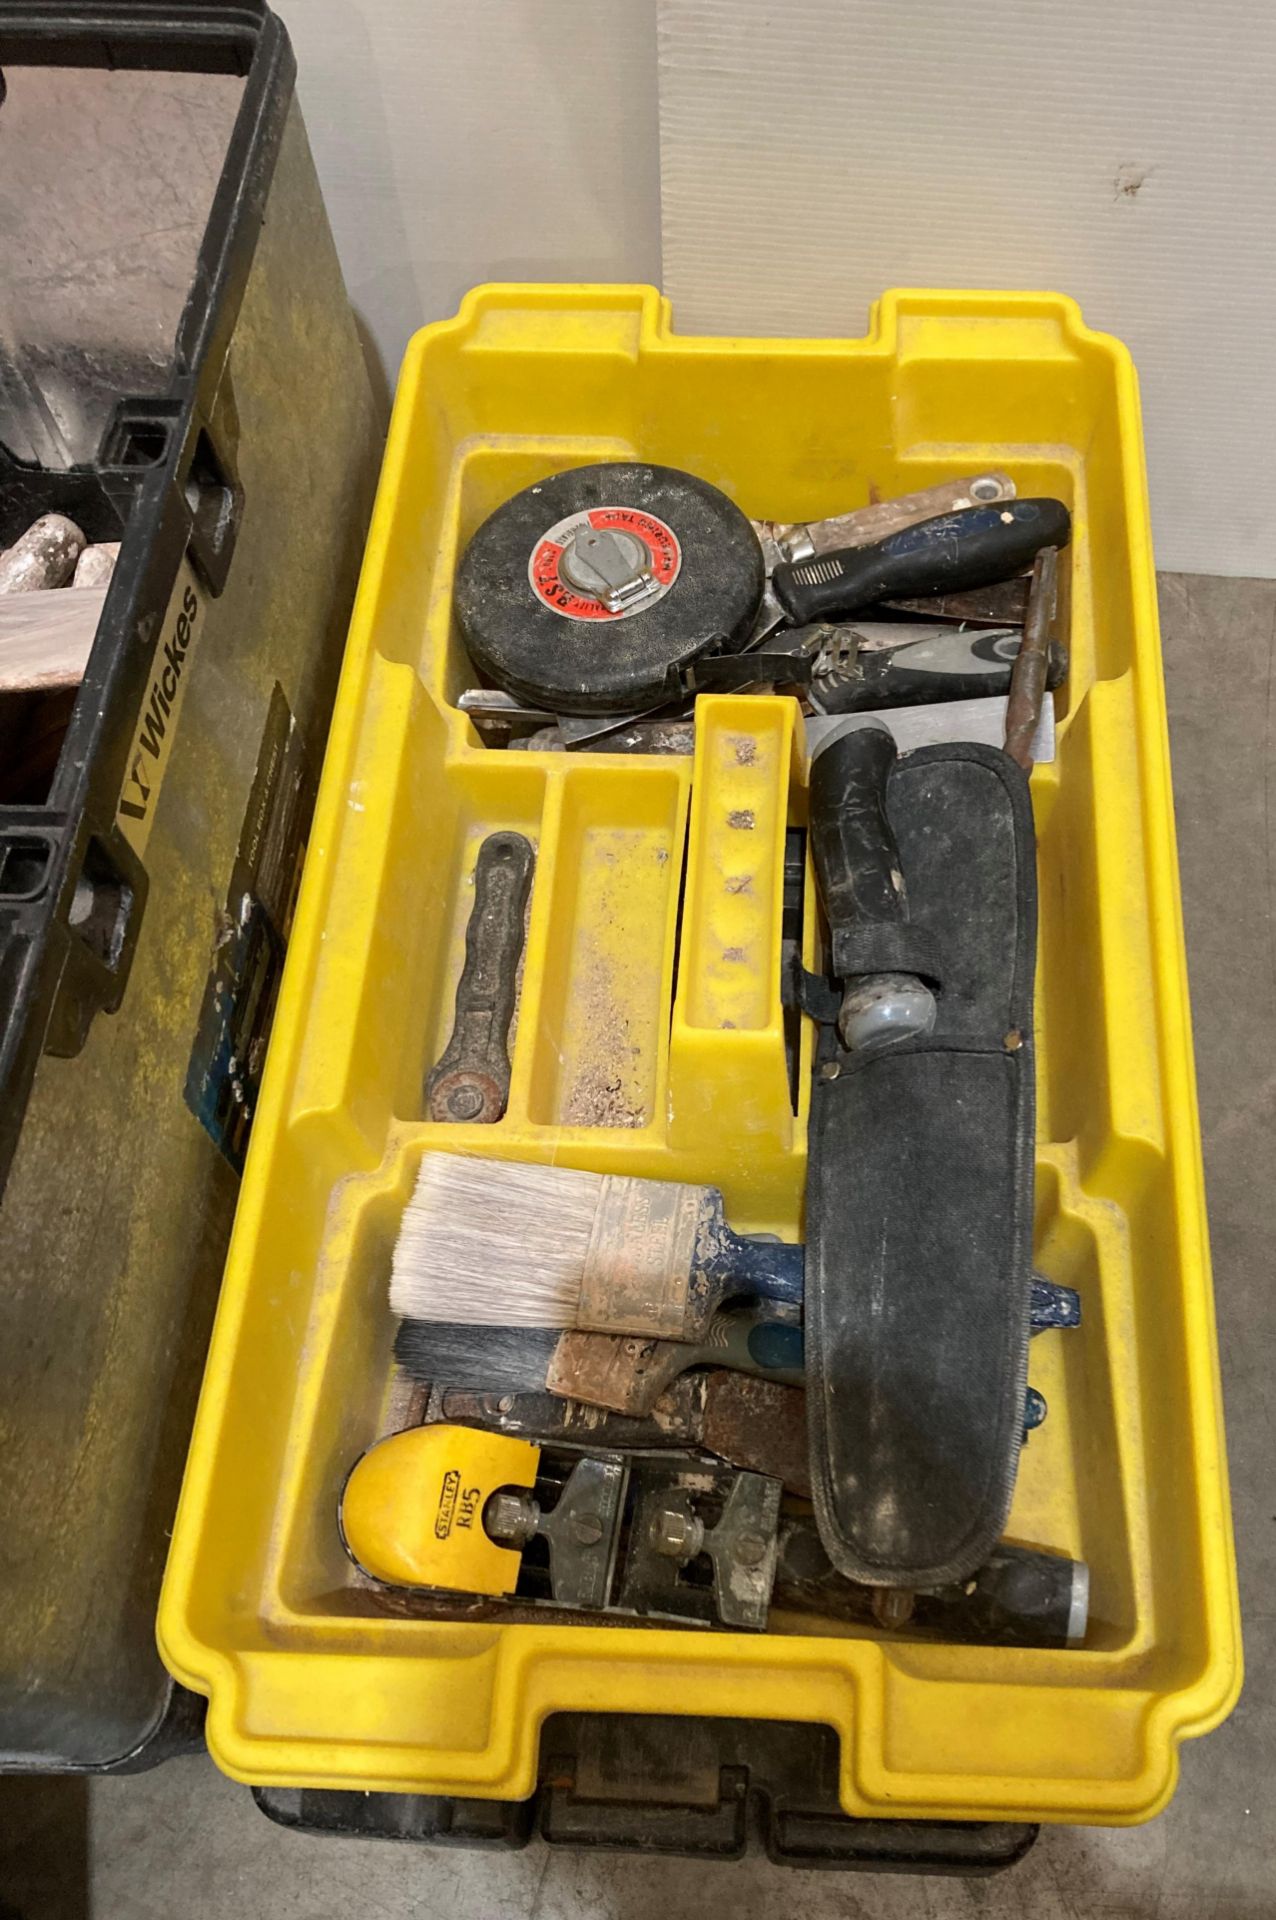 2 x Large tool boxes and contents - assorted plastering equipment (trowels, board, - Image 3 of 4